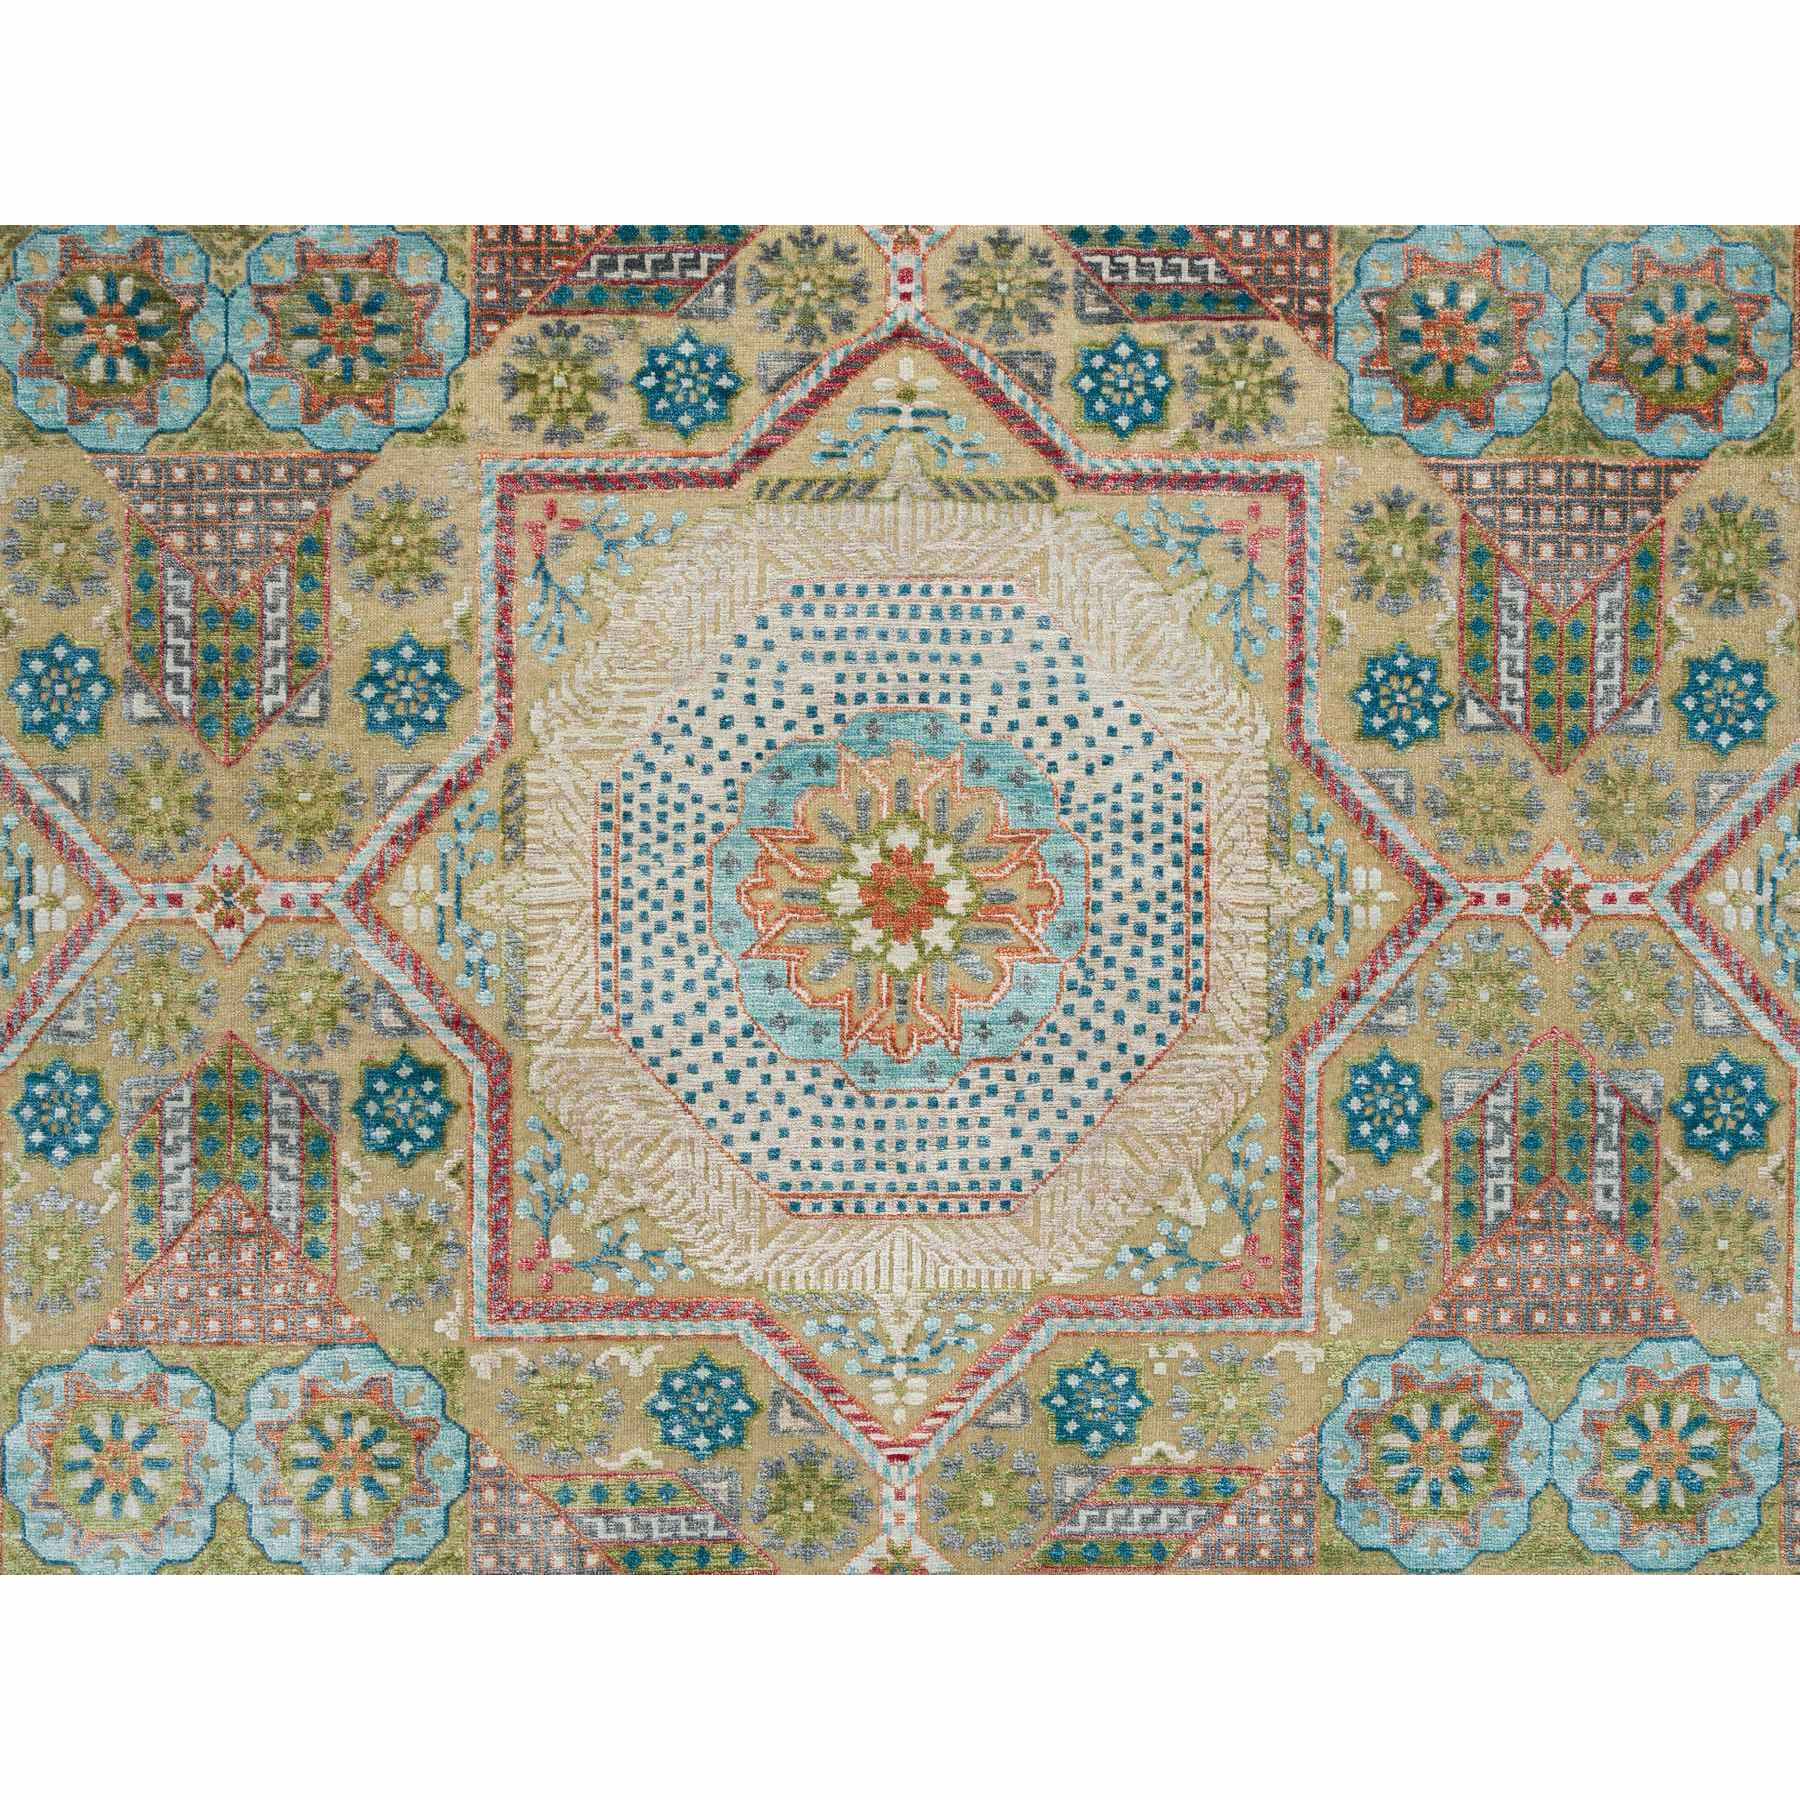 9'9"x14' Colorful, Hand Woven Mamluk Design with Geometric Medallions, Textured Wool and Silk, Oriental Rug 